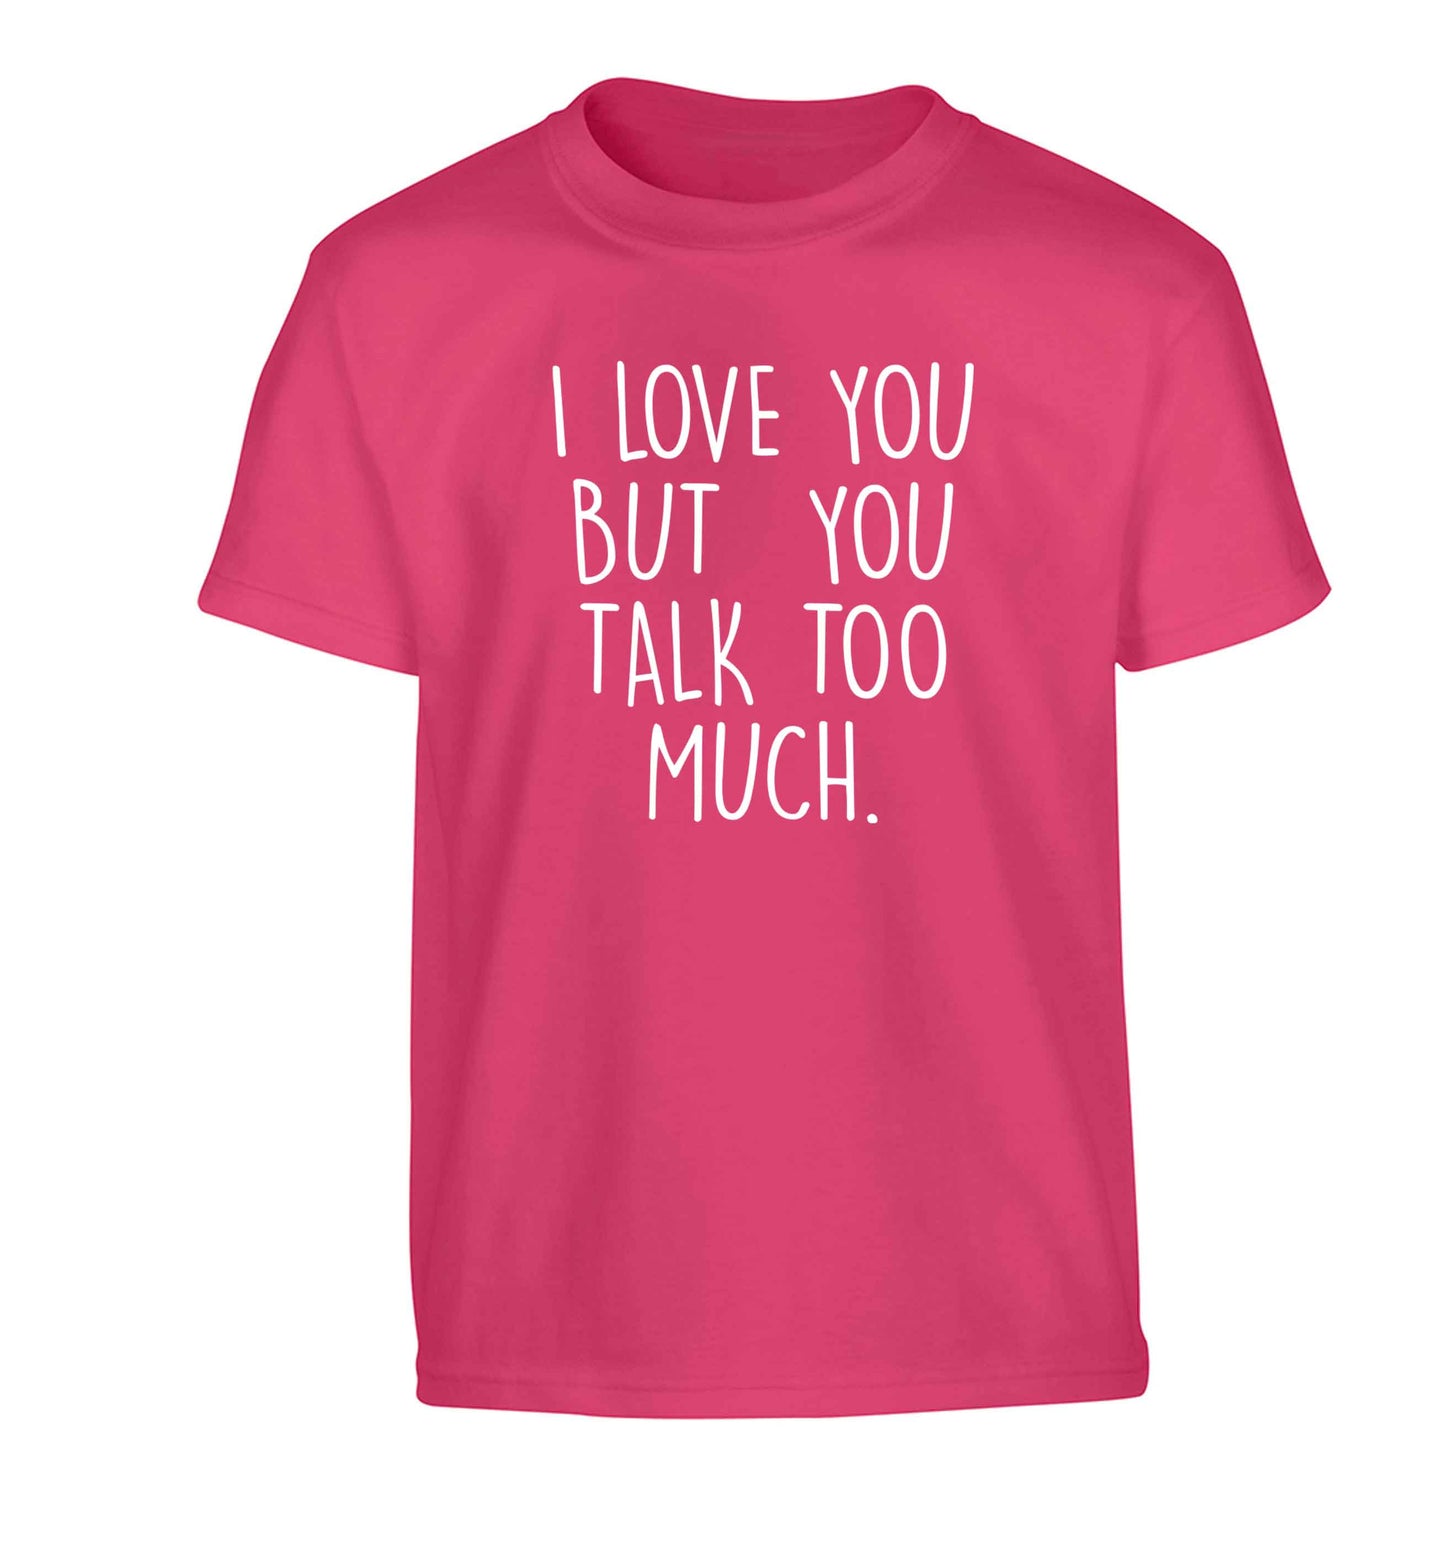 I love you but you talk too much Children's pink Tshirt 12-13 Years